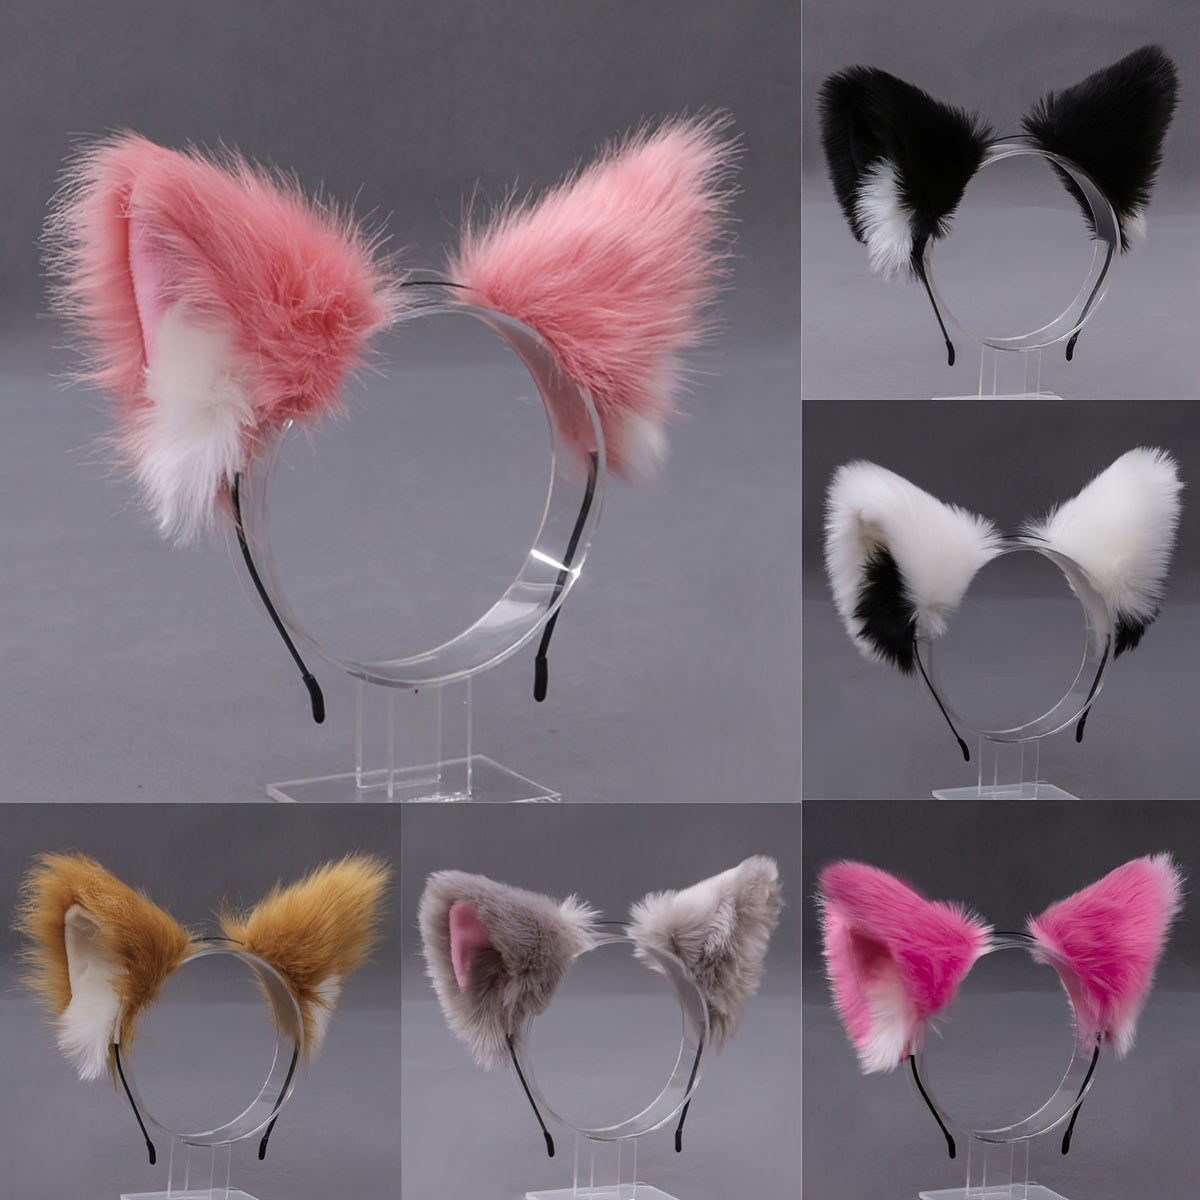 Single Faux Wool Cute Car Ears Headband - Soft, Fluffy, Color Matching, Sweet Style Dress Up Hair Accessories for Women and Female Cosplay, Anime Photo Props - Rexpect Nerd